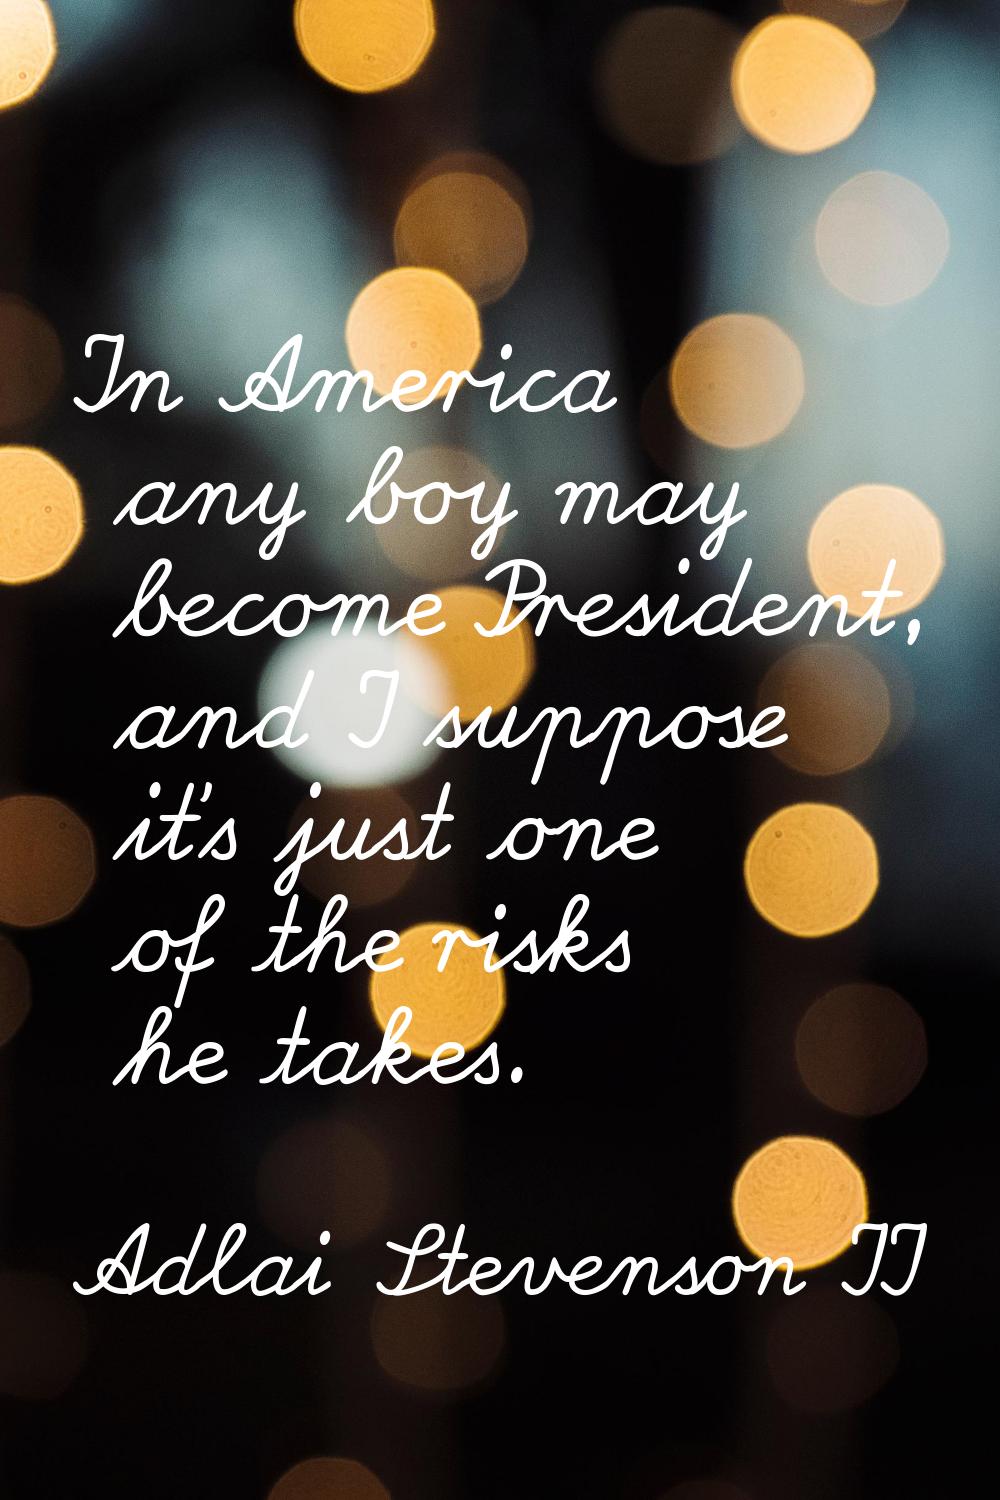 In America any boy may become President, and I suppose it's just one of the risks he takes.